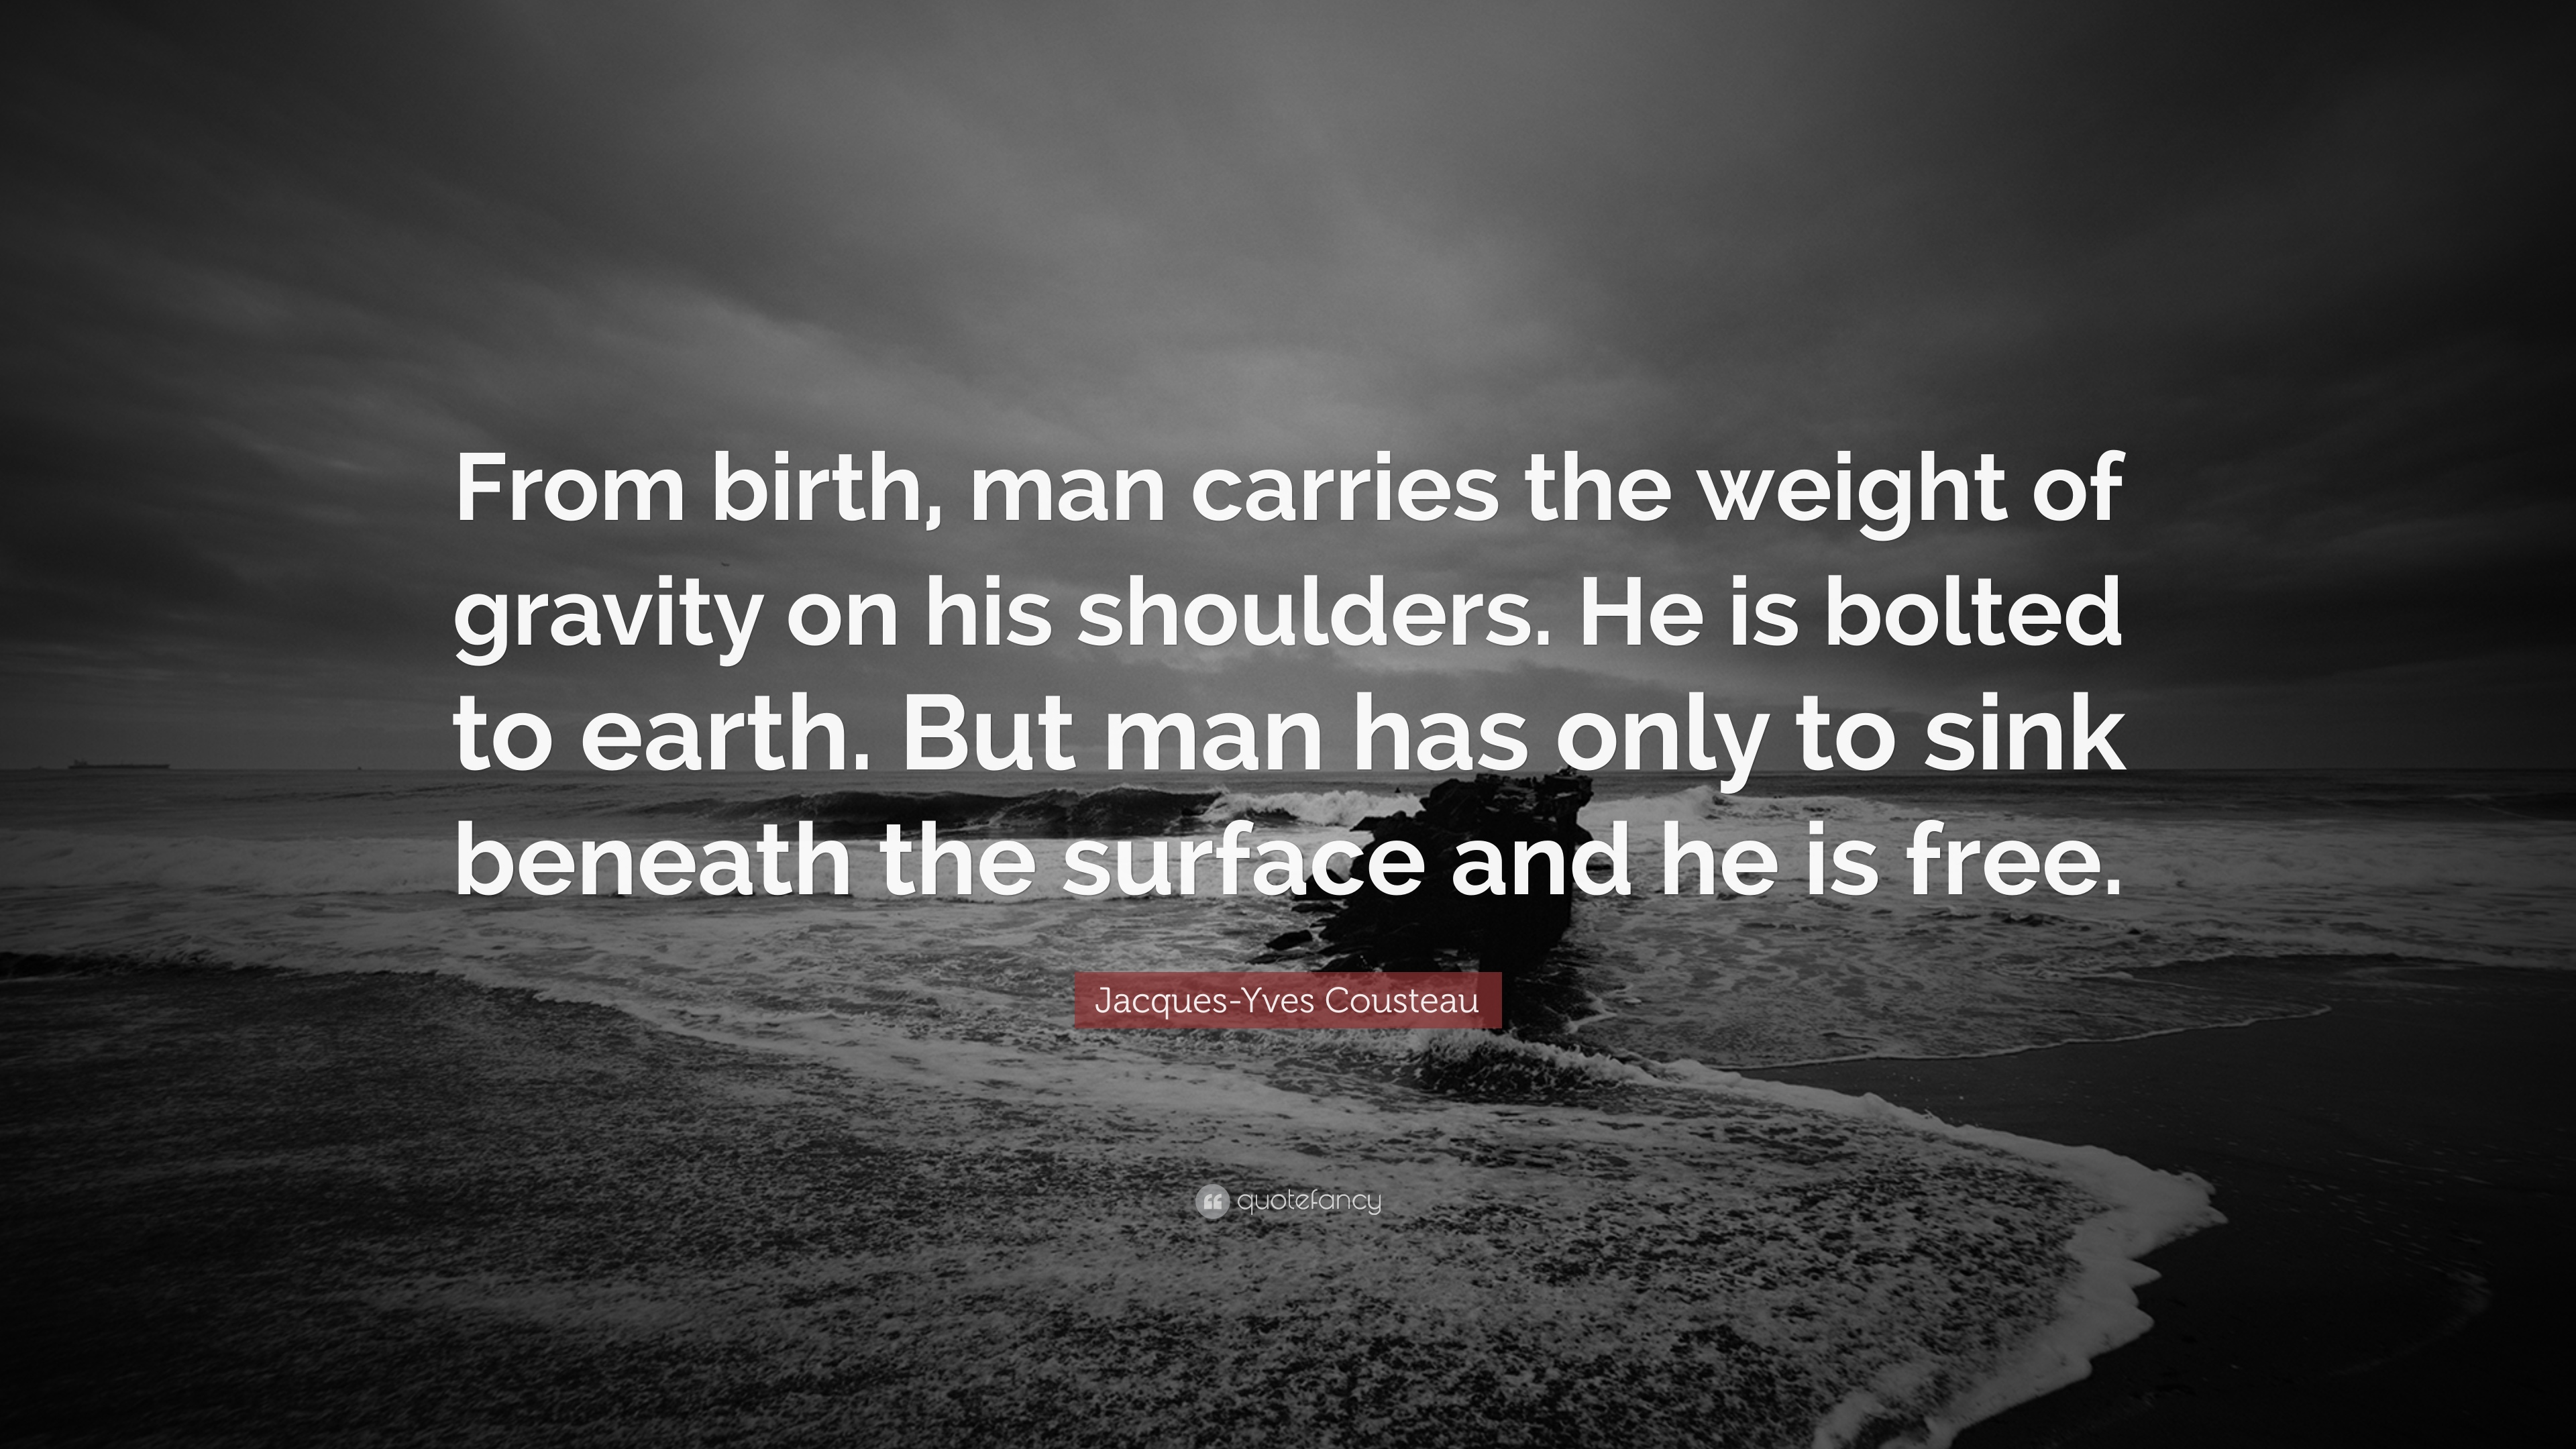 Jacques Yves Cousteau Quote: “From Birth, Man Carries The Weight